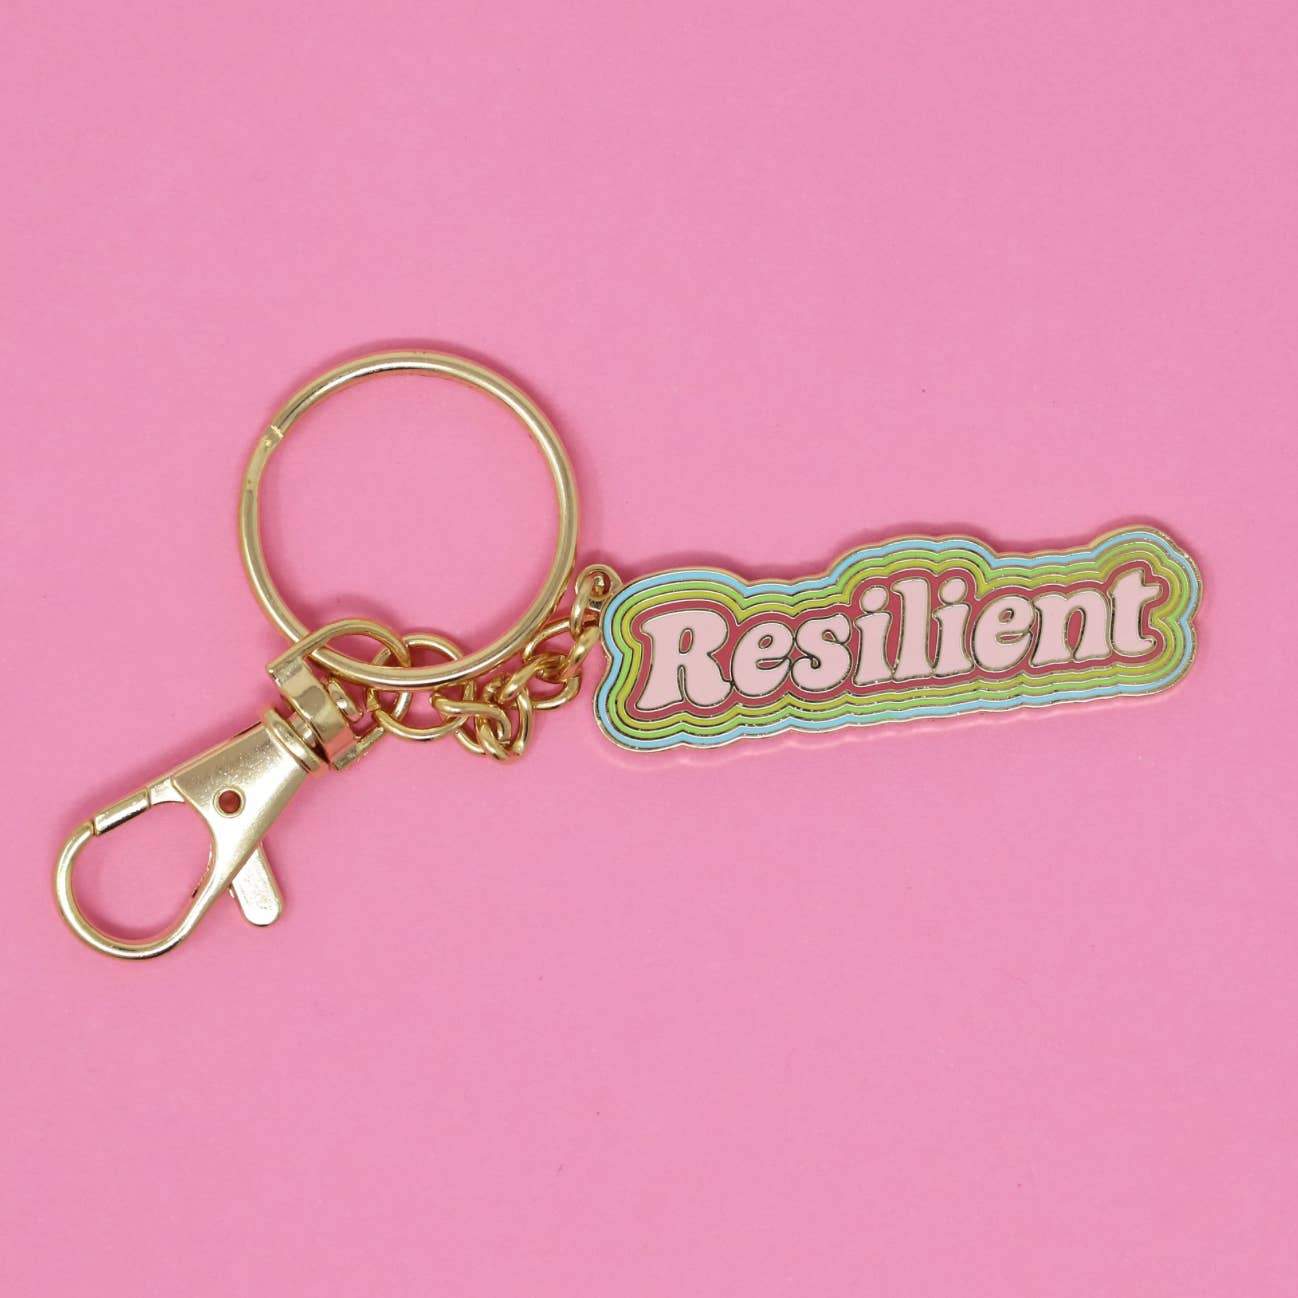 Resilient Key Chain